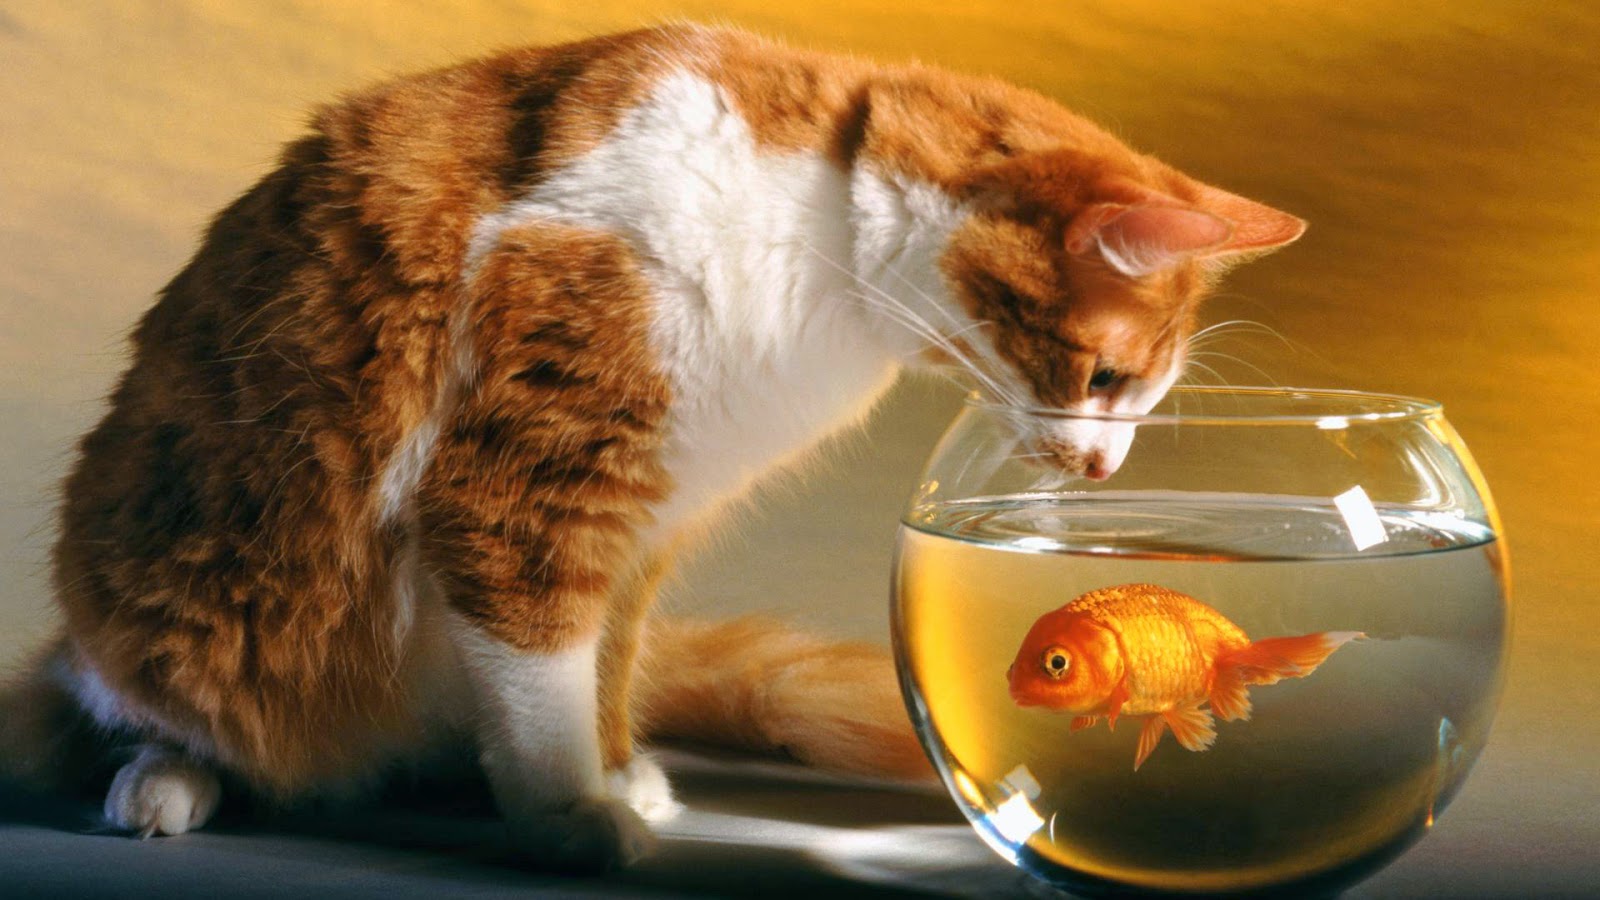 cute cats wallpapers free download,cat,small to medium sized cats,felidae,goldfish,whiskers